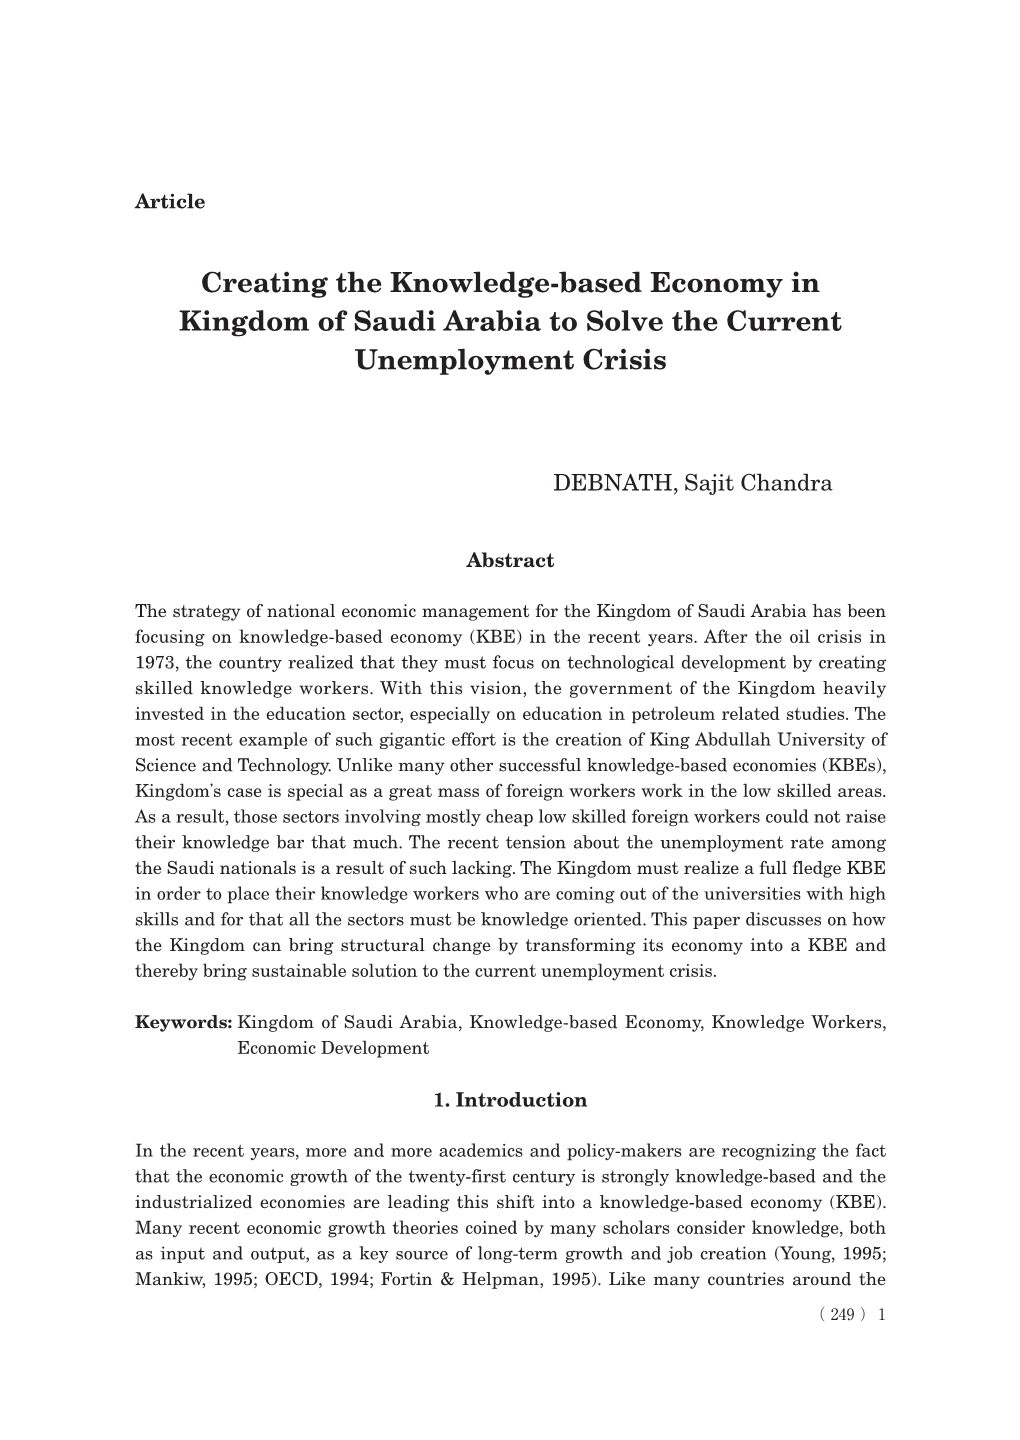 Creating the Knowledge-Based Economy in Kingdom of Saudi Arabia to Solve the Current Unemployment Crisis（DEBNATH）